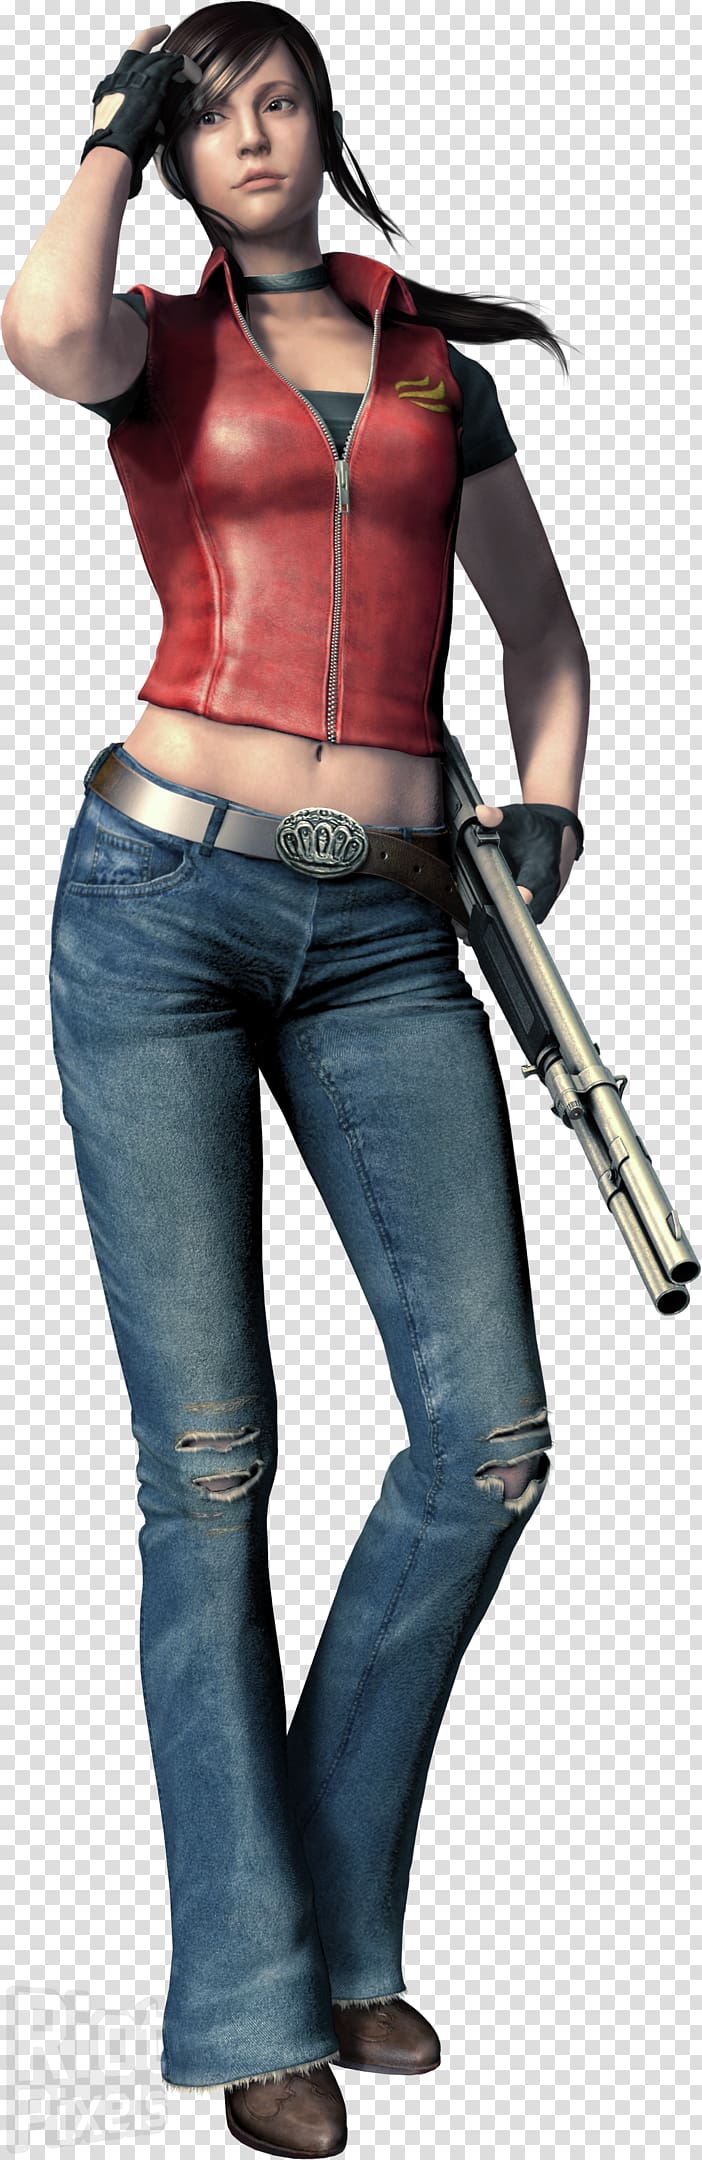 Claire Redfield Resident Evil: The Mercenaries 3D Resident Evil – Code: Veronica Resident Evil: Revelations, others transparent background PNG clipart